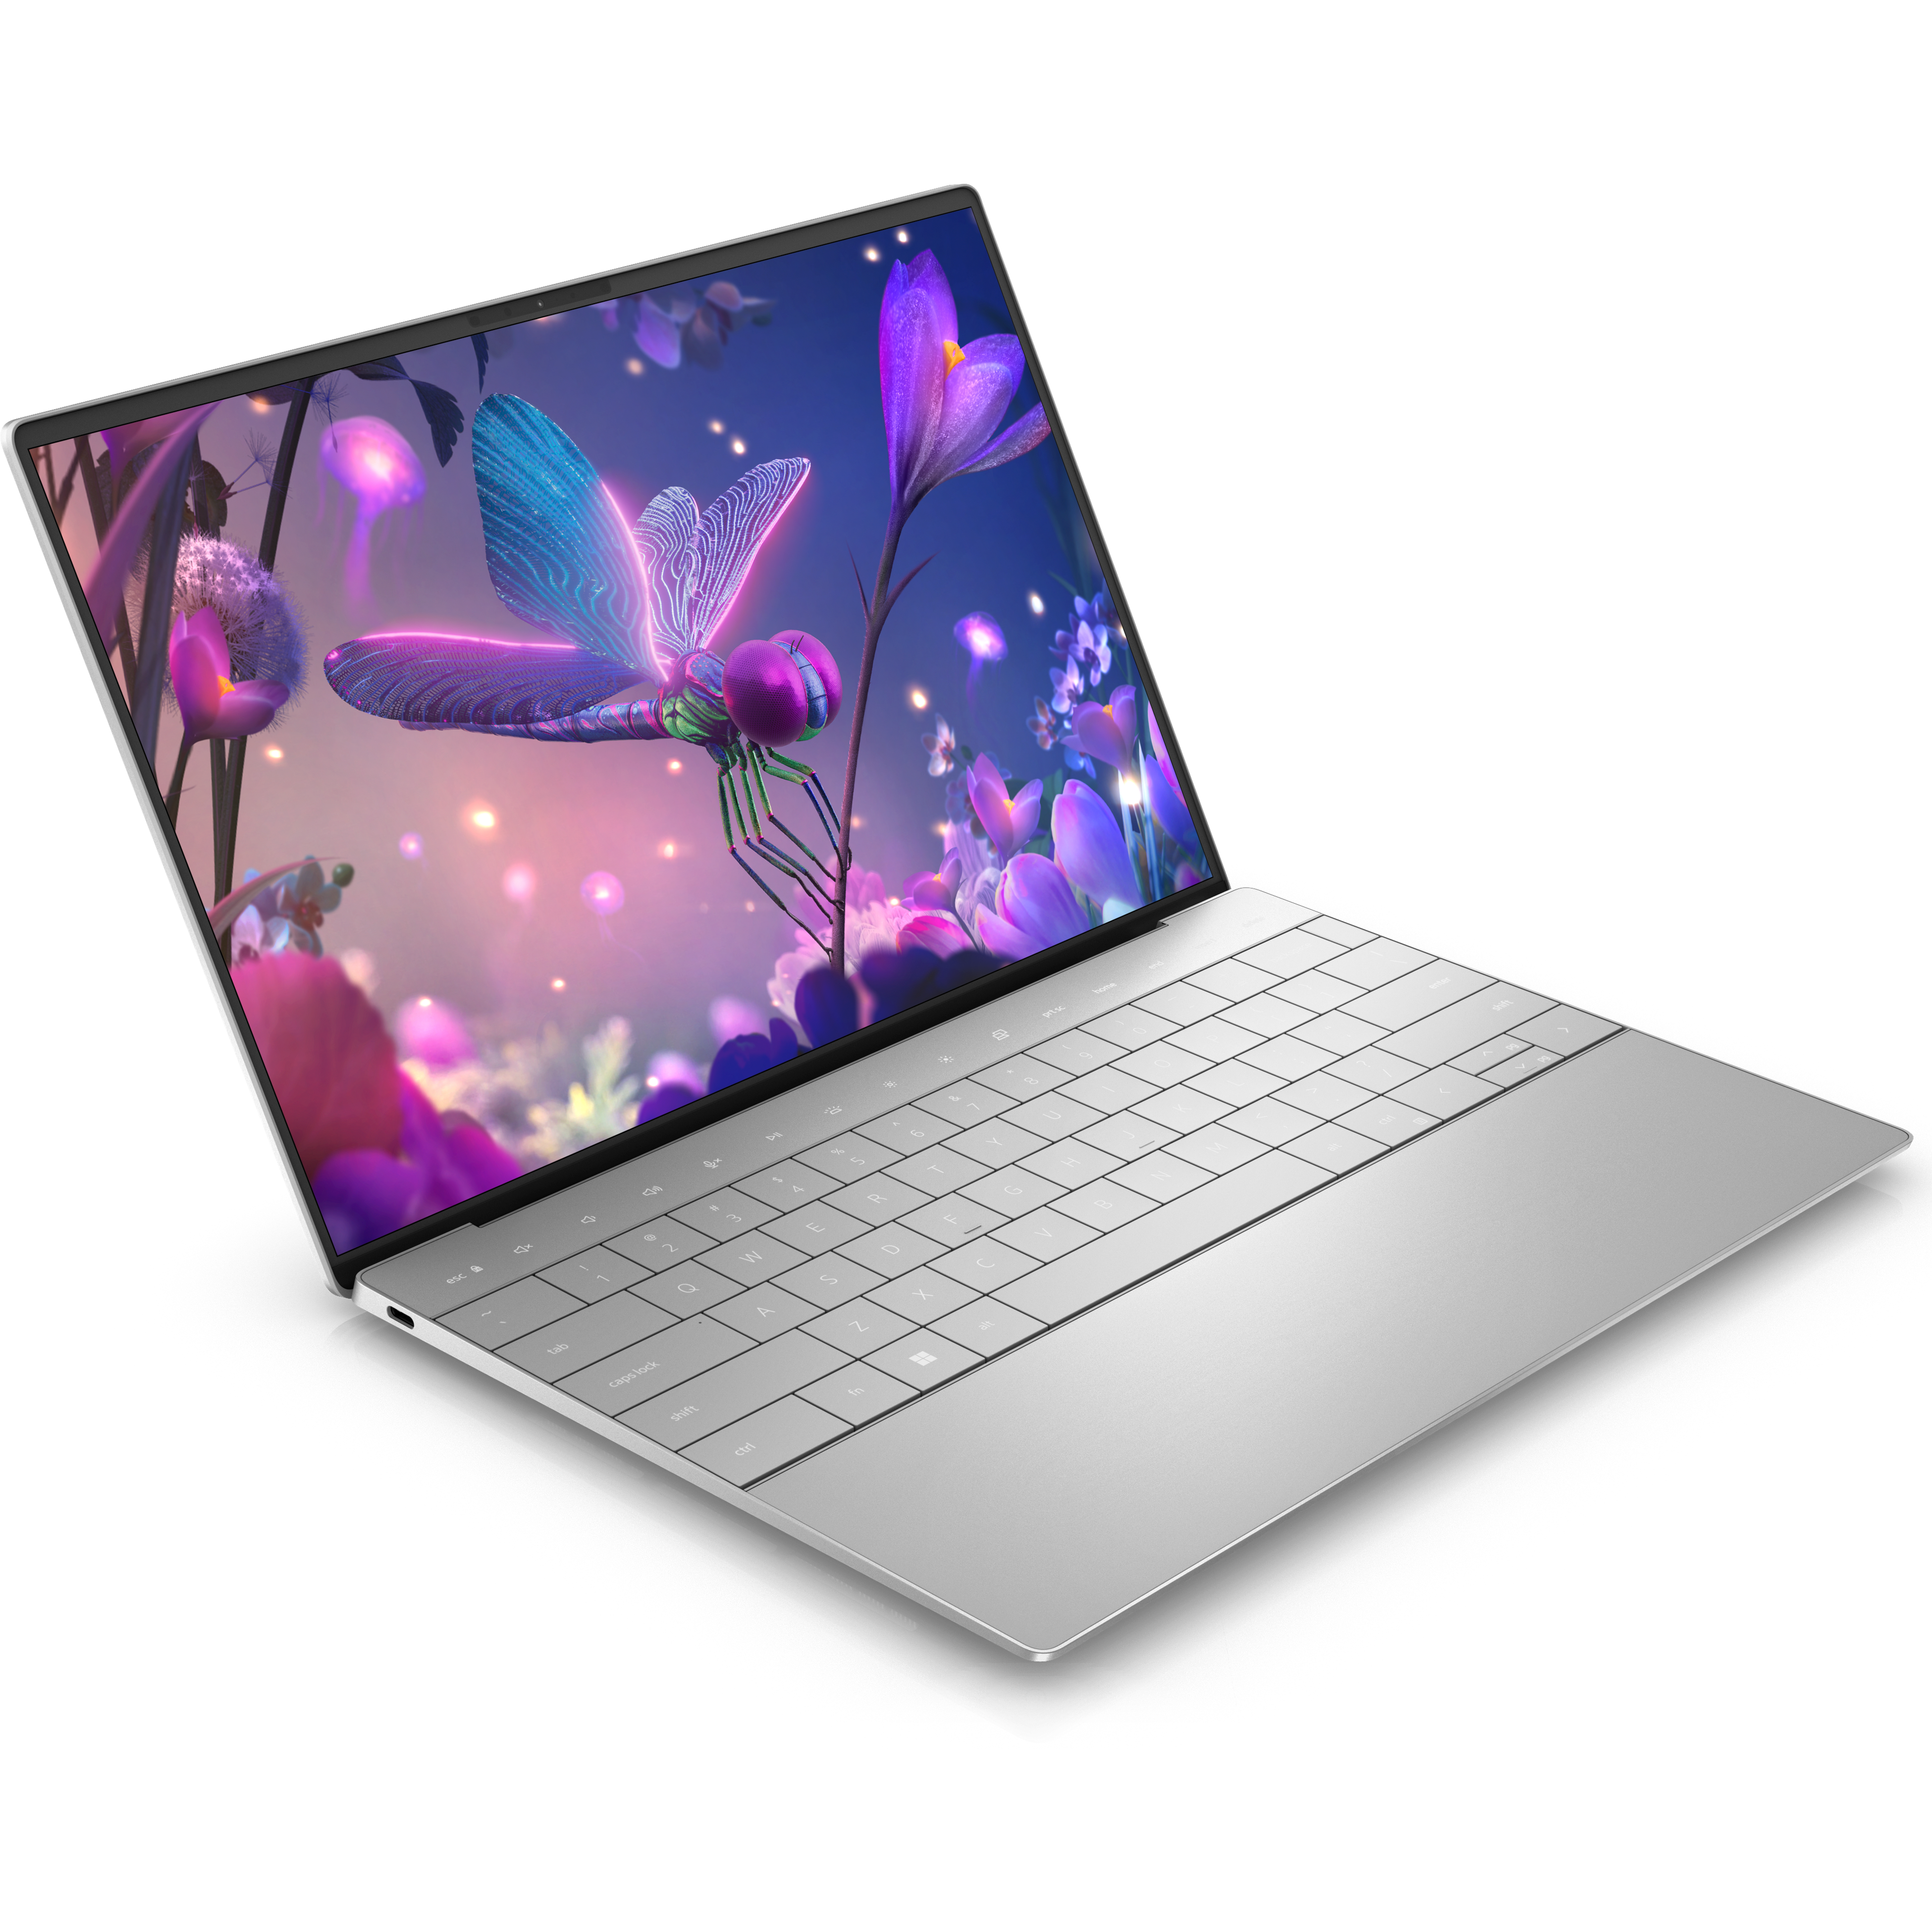 Angled front view of the Dell XPS 13 Plus laptop facing right